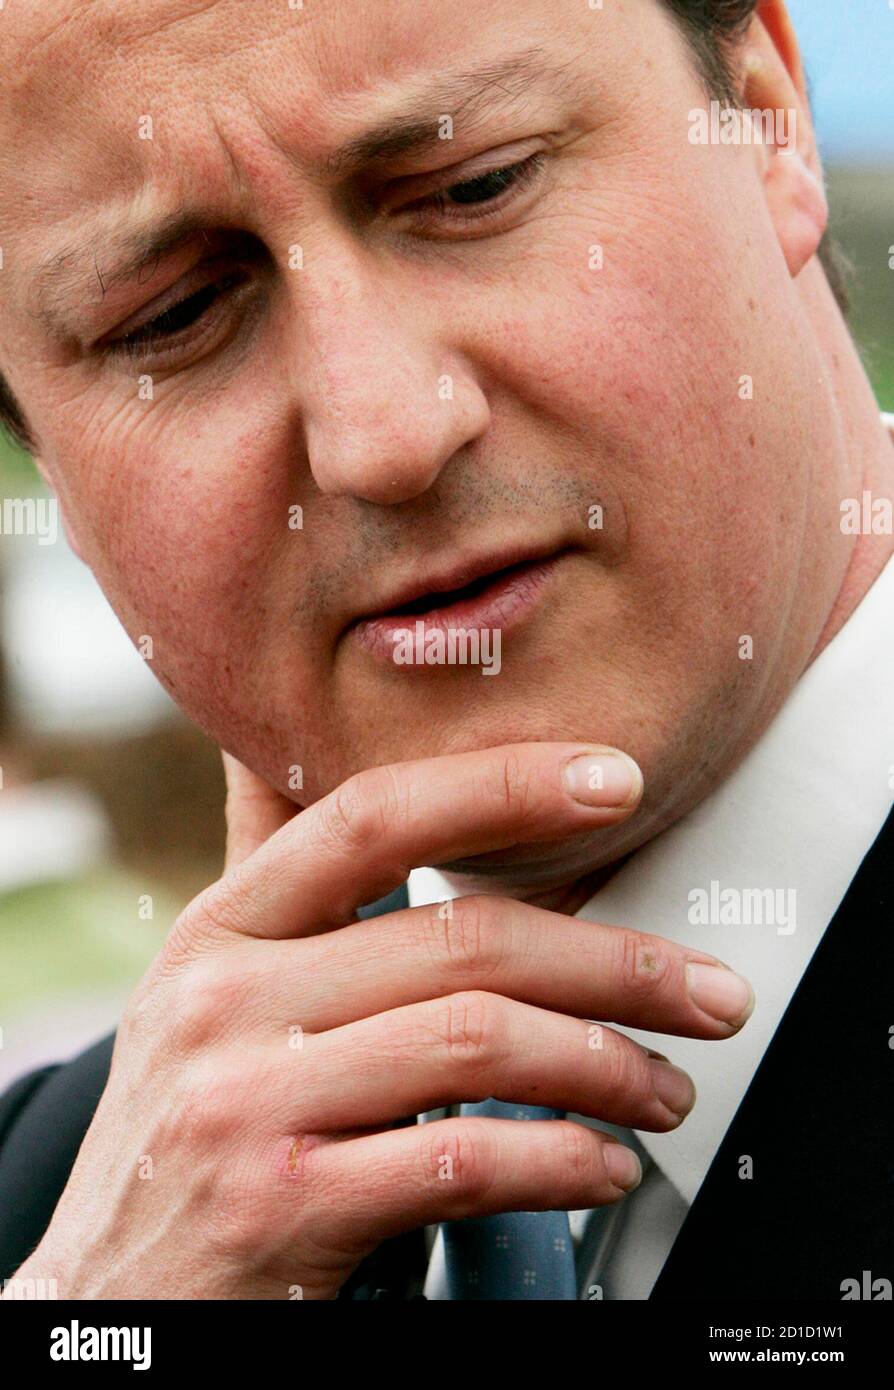 Britain's opposition Conservative Party leader David Cameron reacts  while addressing journalists in Gretna, Scotland April 19, 2007. Cameron joined Northern Ireland politician David Trimble and Scottish Conservative Party leader Annabel Goldie at various sites around Dumfrieshire whilst campaigning ahead of the forthcoming Scottish Parliamentary elections. REUTERS/David Moir (BRITAIN) Stock Photo